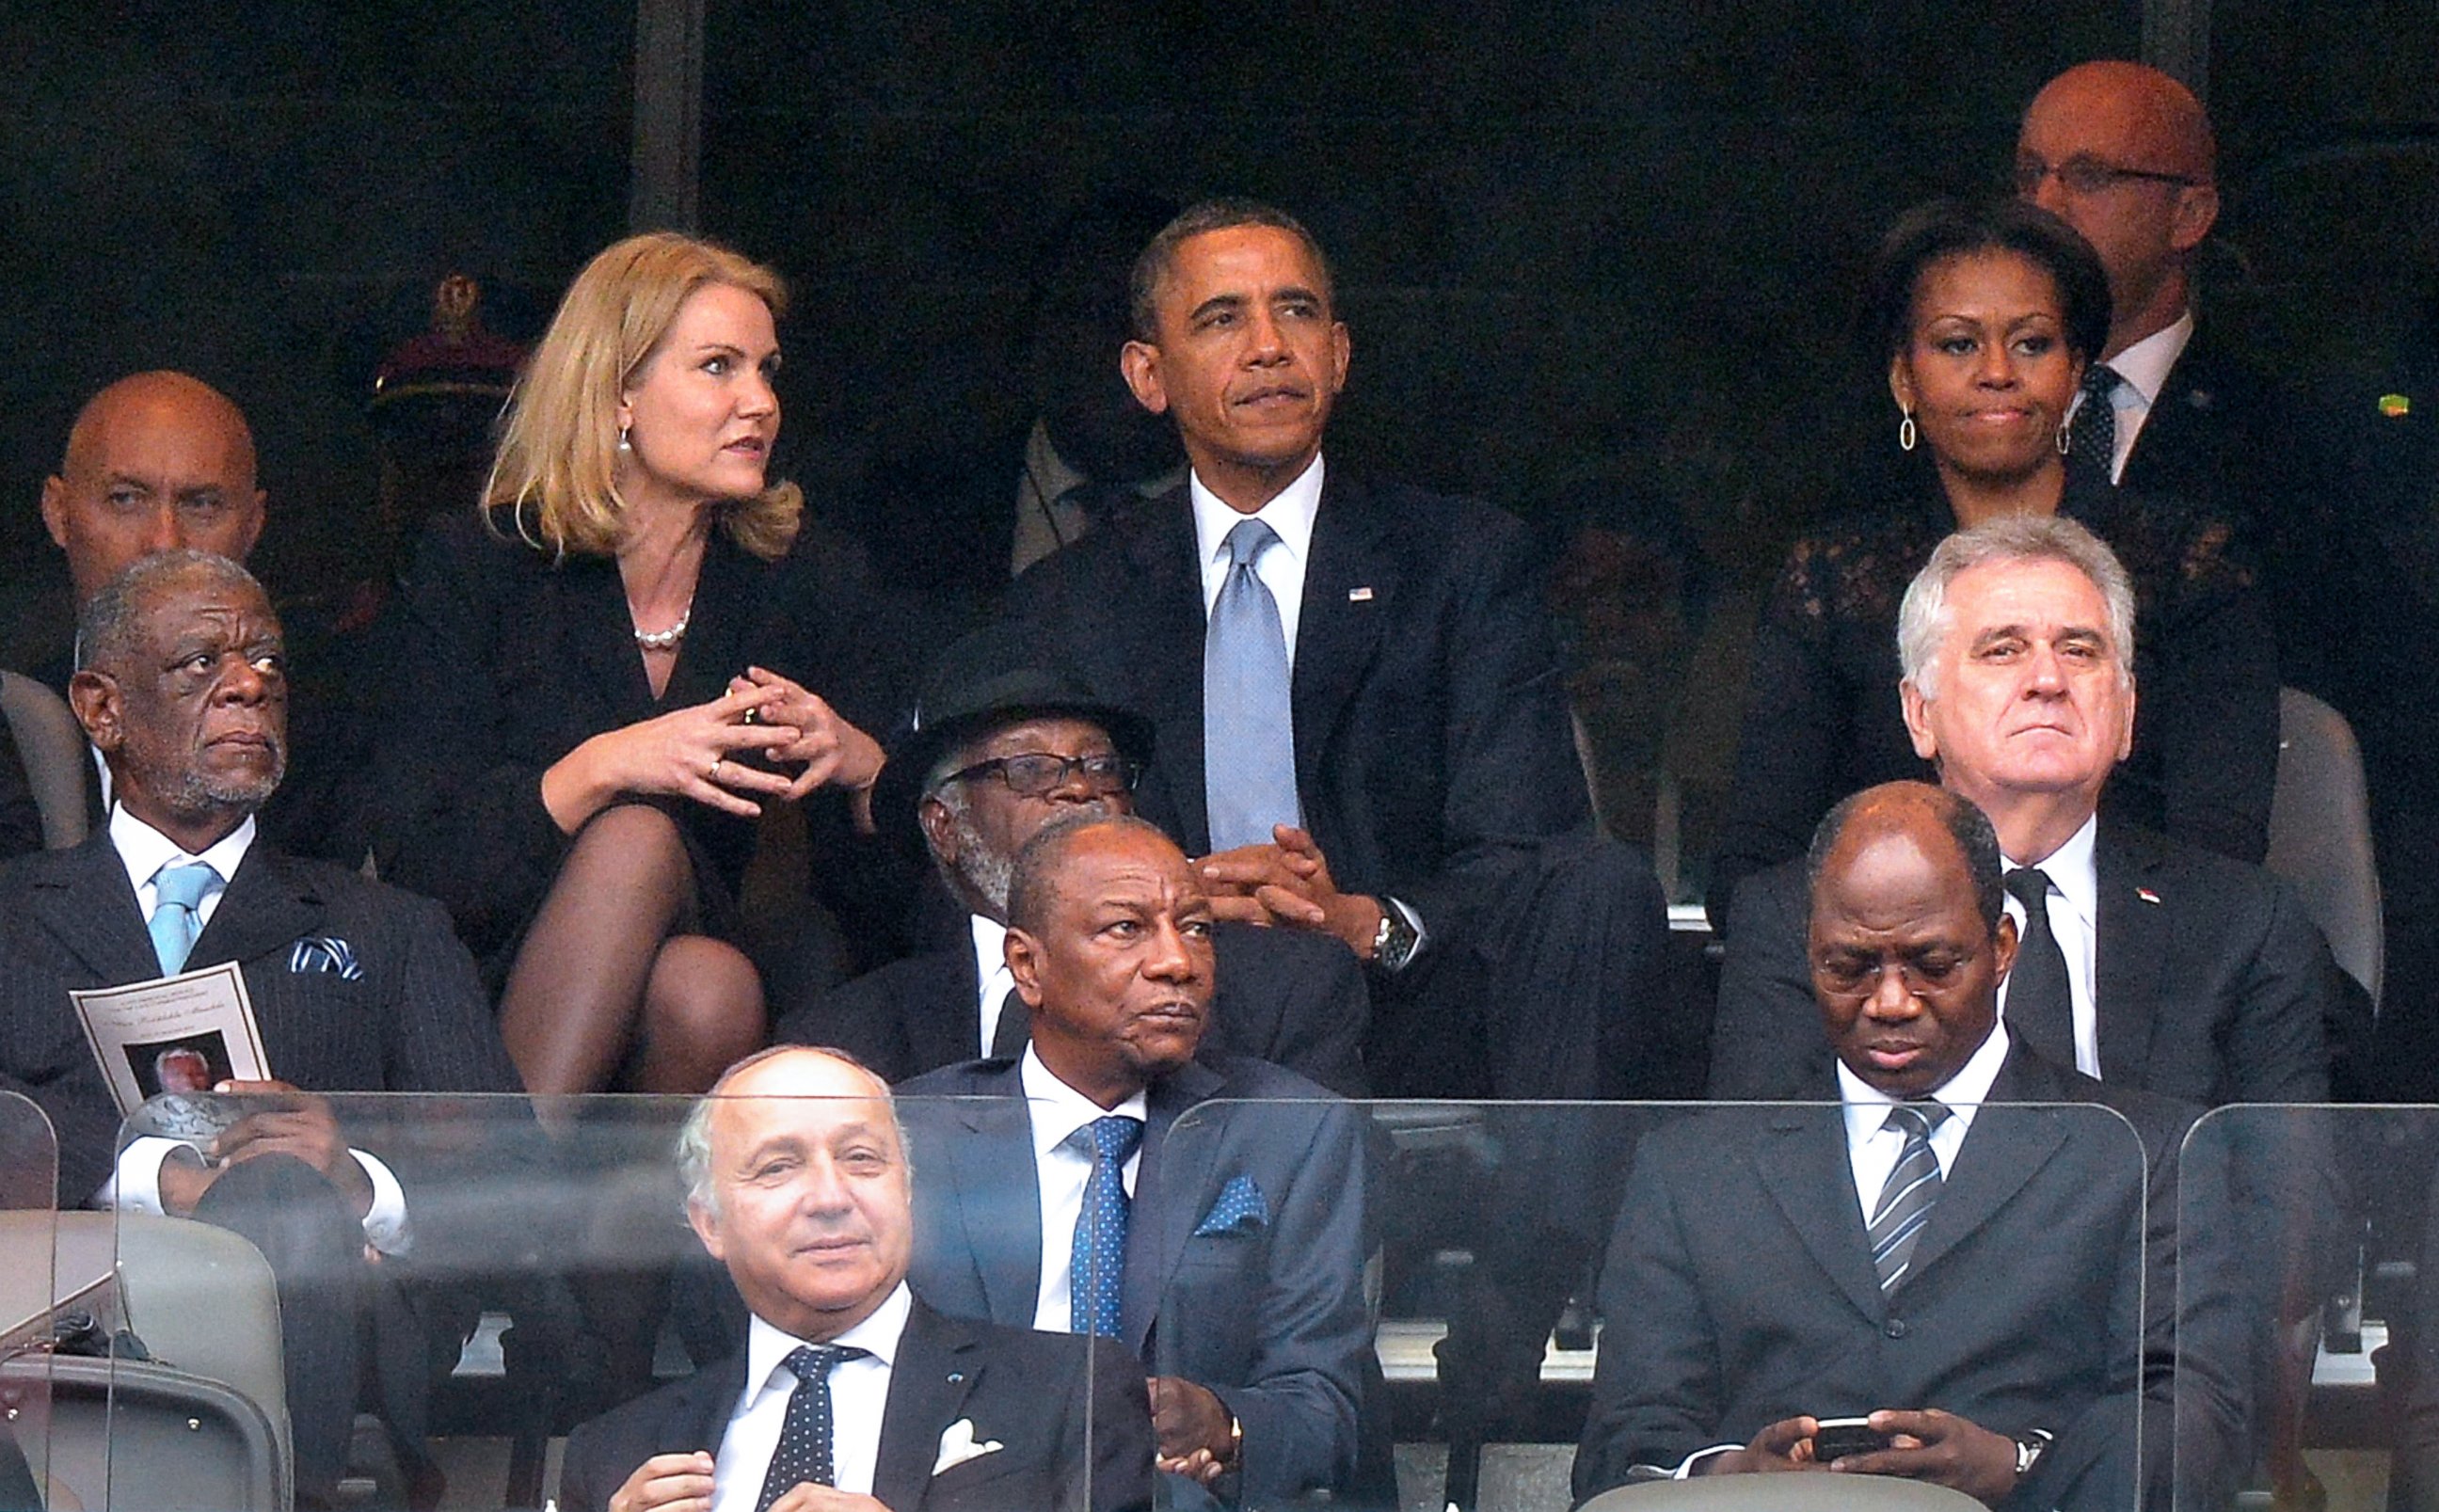 PHOTO: Danish Prime Minister Helle Thorning-Schmidt, US President Barack Obama and First Lady Michelle Obama attend the memorial service for Nelson Mandela at Soccer City Stadium in Johannesburg, Dec. 10, 2013.